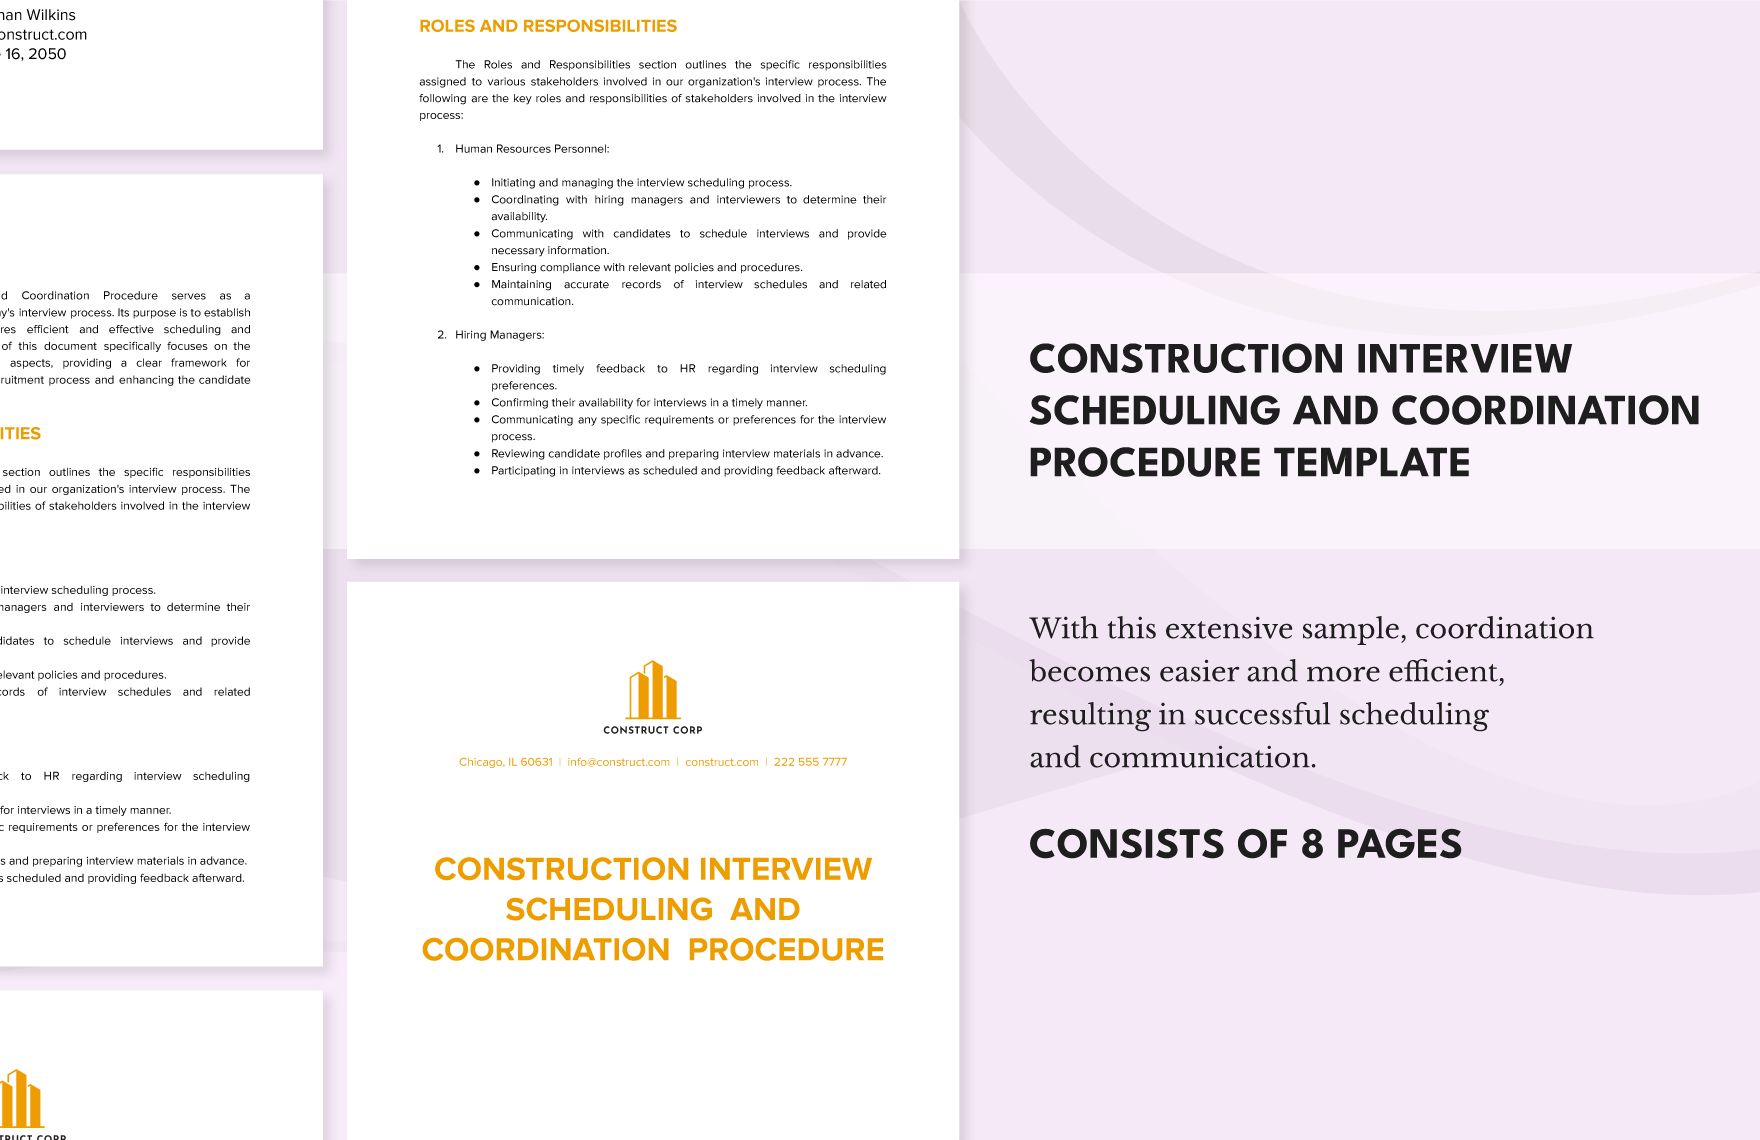 Construction Interview Scheduling and Coordination Procedure Template in Word, Google Docs